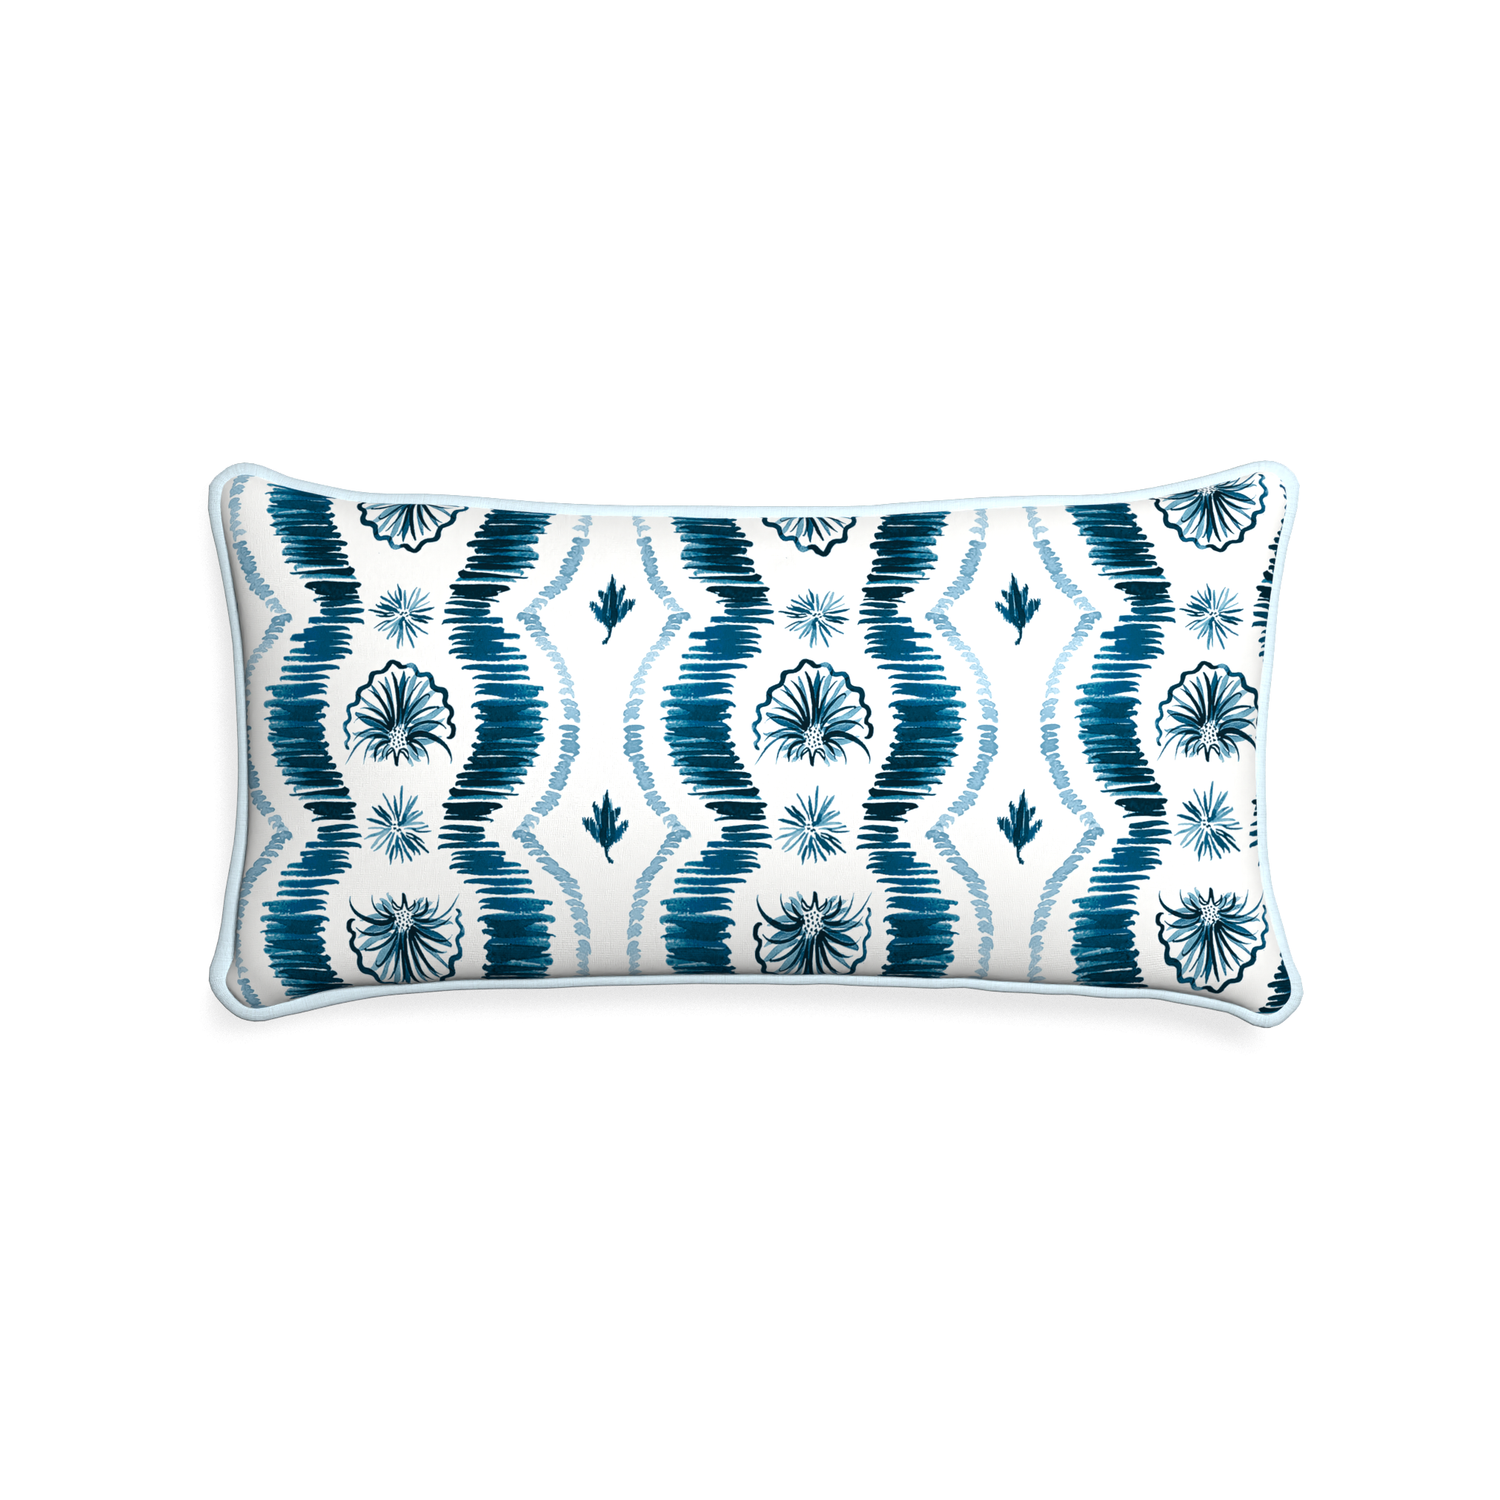 Midi-lumbar alice custom blue ikatpillow with powder piping on white background